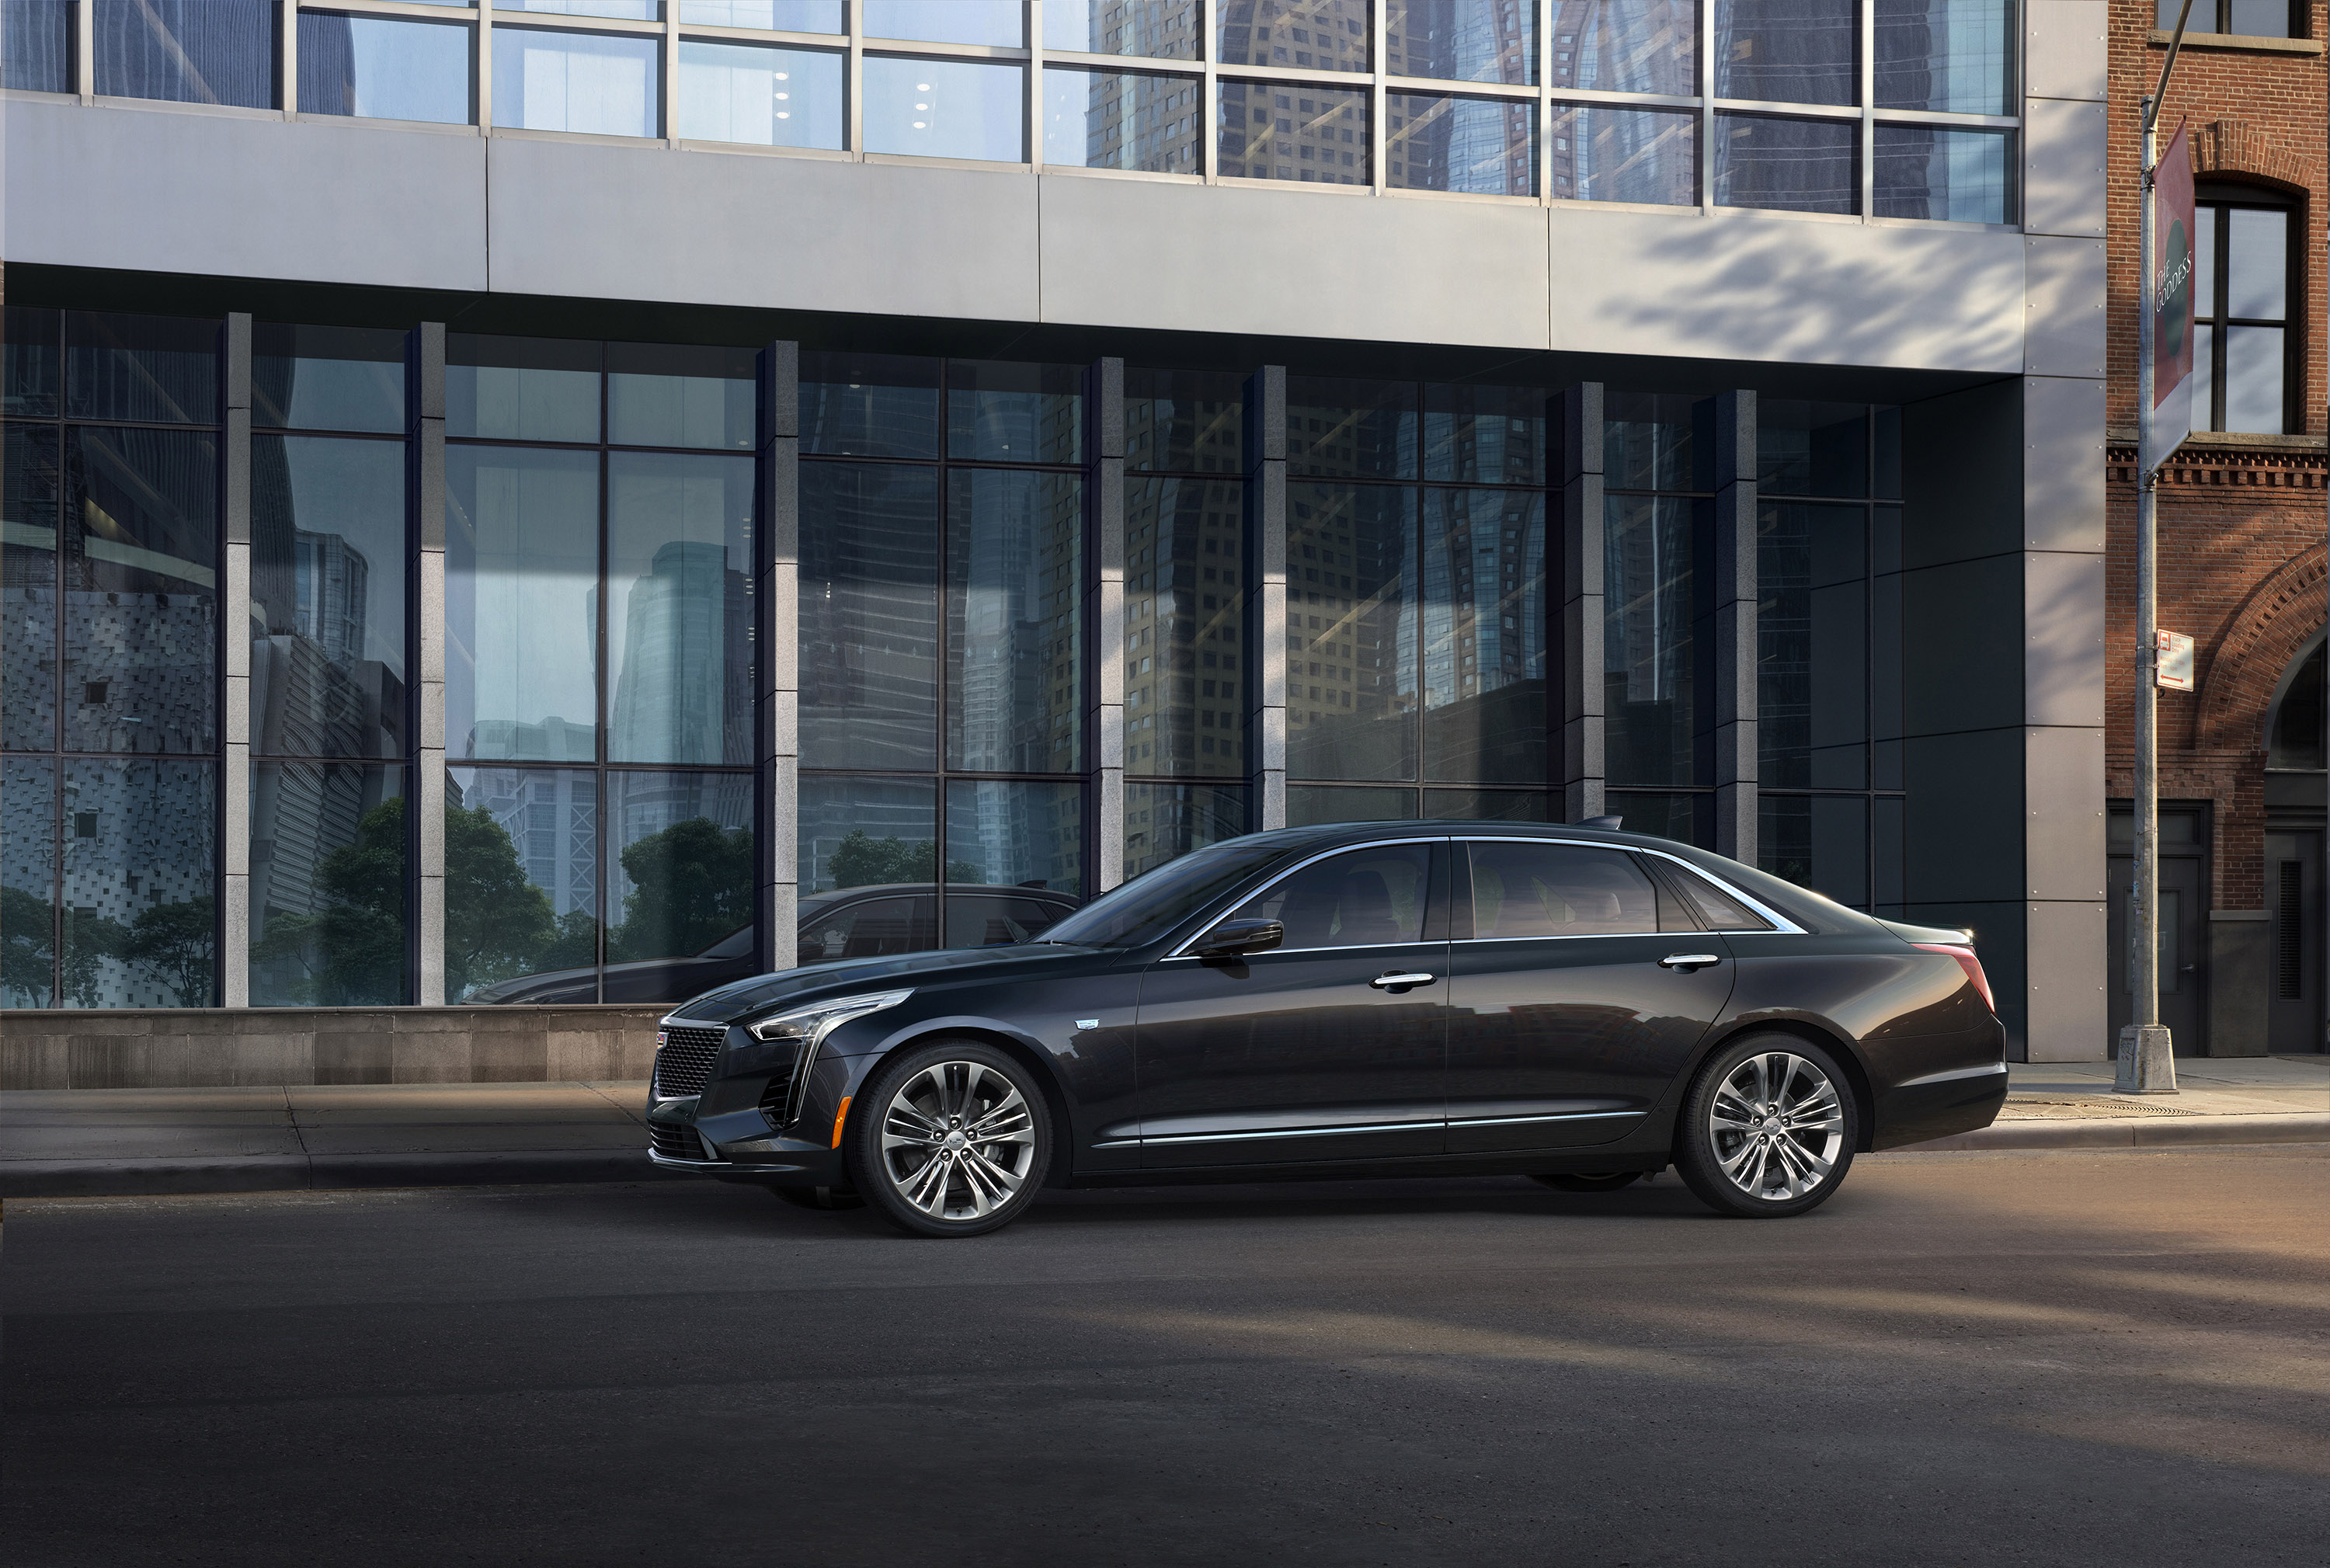 Cadillac CT6 V-Sport: not available everywhere